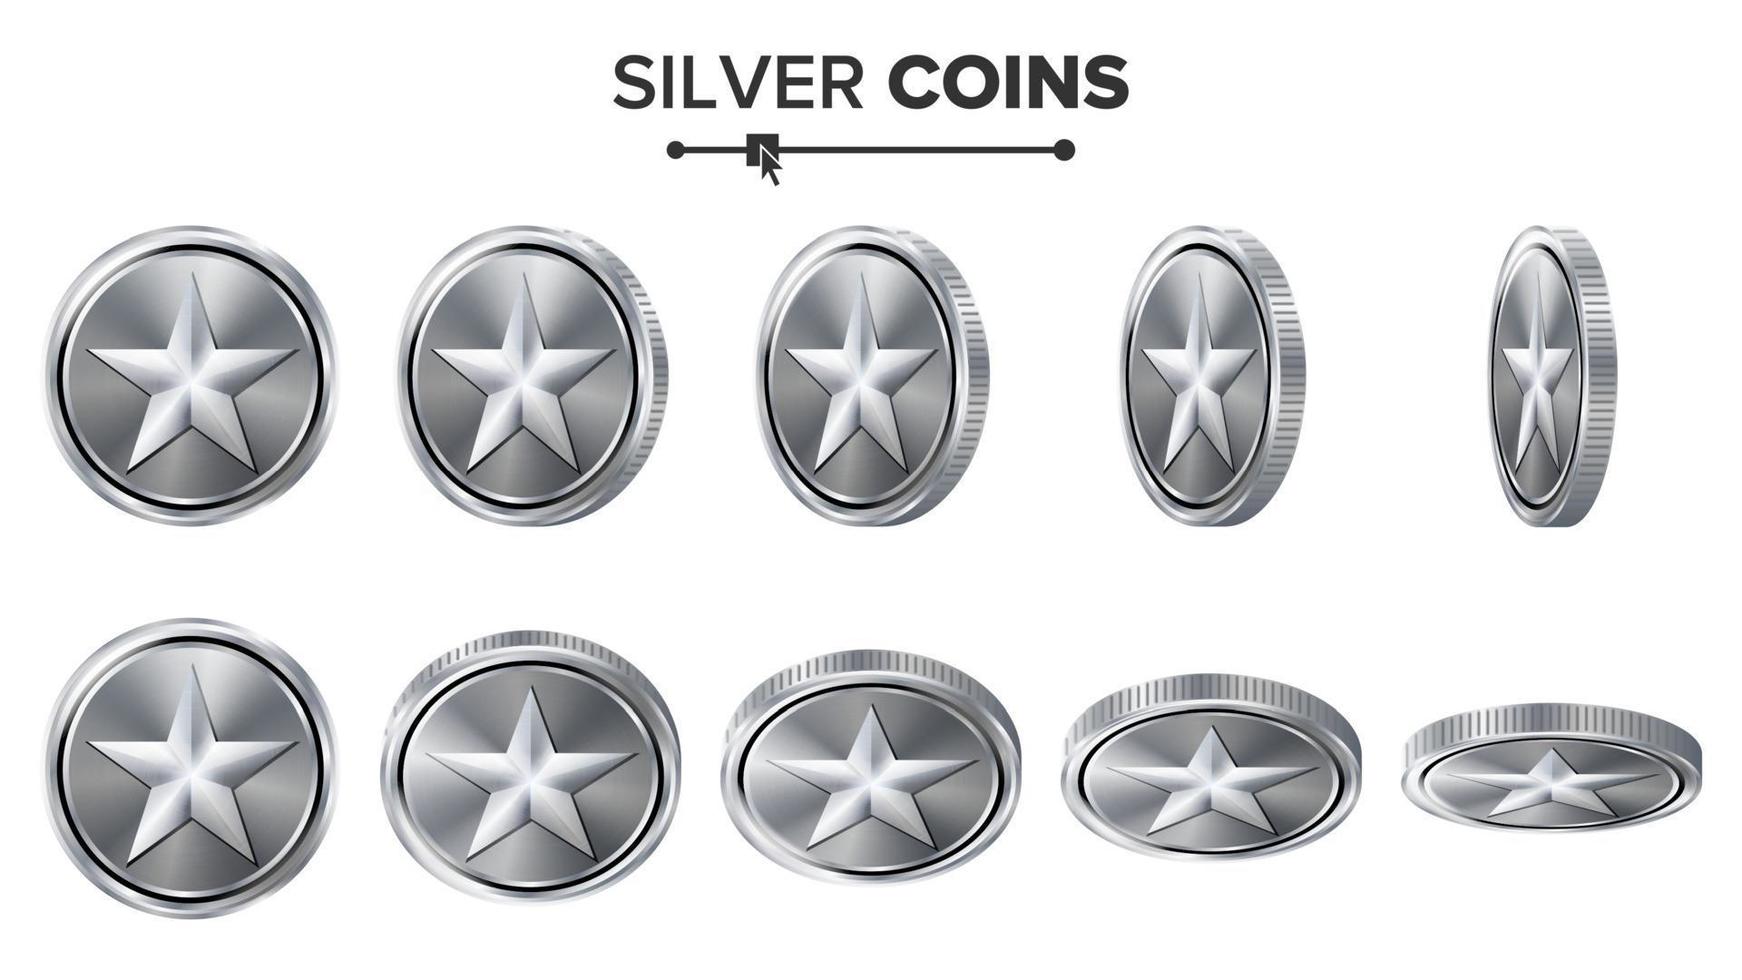 Game 3D Silver Coin Vector With Star. Flip Different Angles. Achievement Coin Icons, Sign, Success, Winner, Bonus, Cash Symbol. Illustration Isolated On White. For Web, Game Or App Interface.